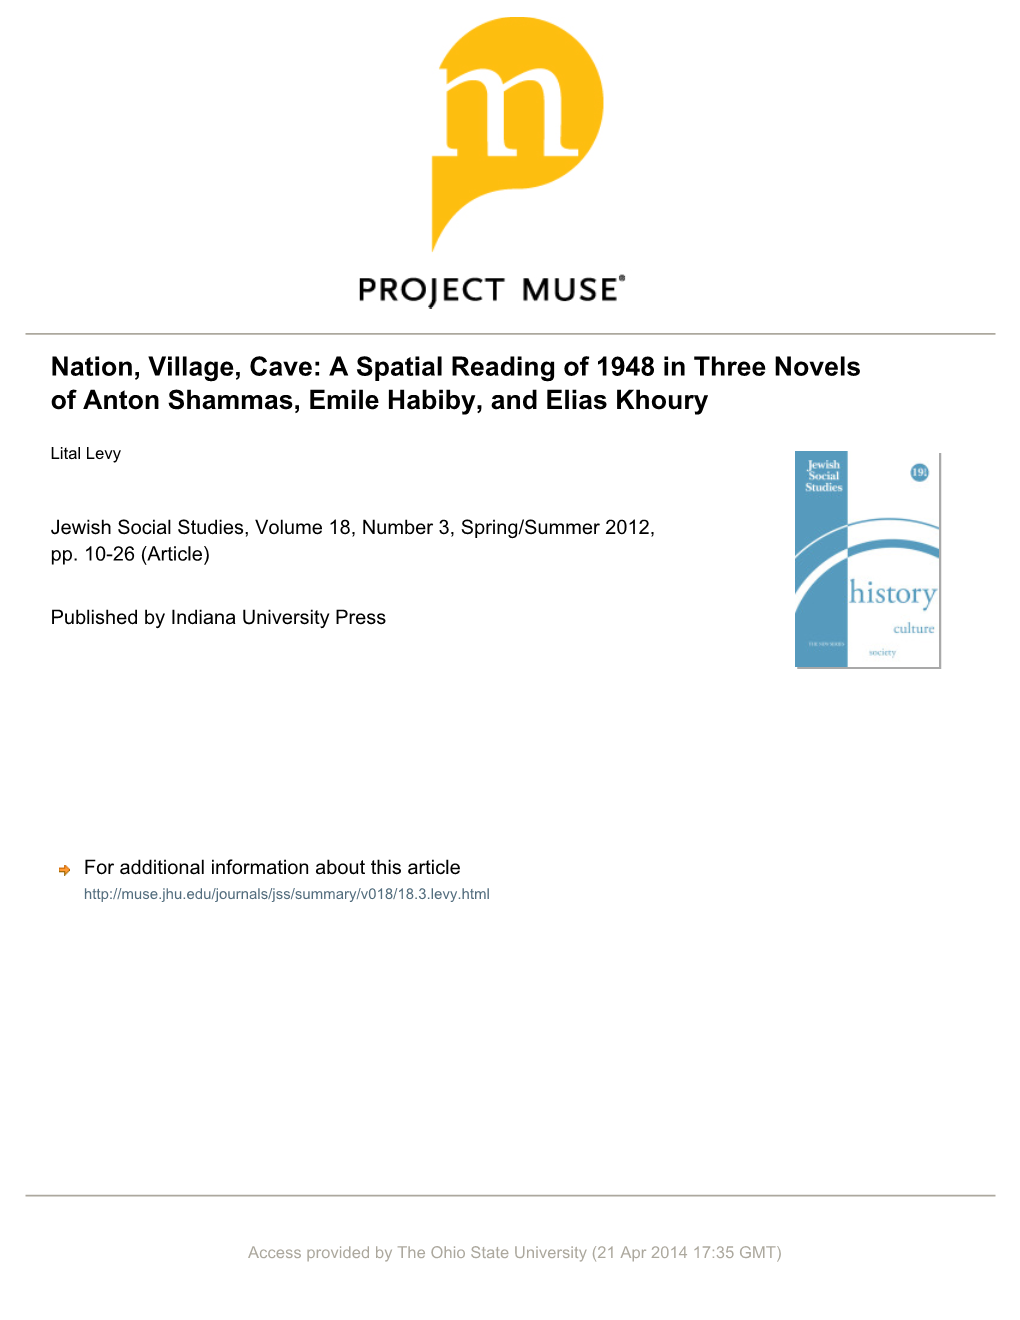 Nation, Village, Cave: a Spatial Reading of 1948 in Three Novels of Anton Shammas, Emile Habiby, and Elias Khoury